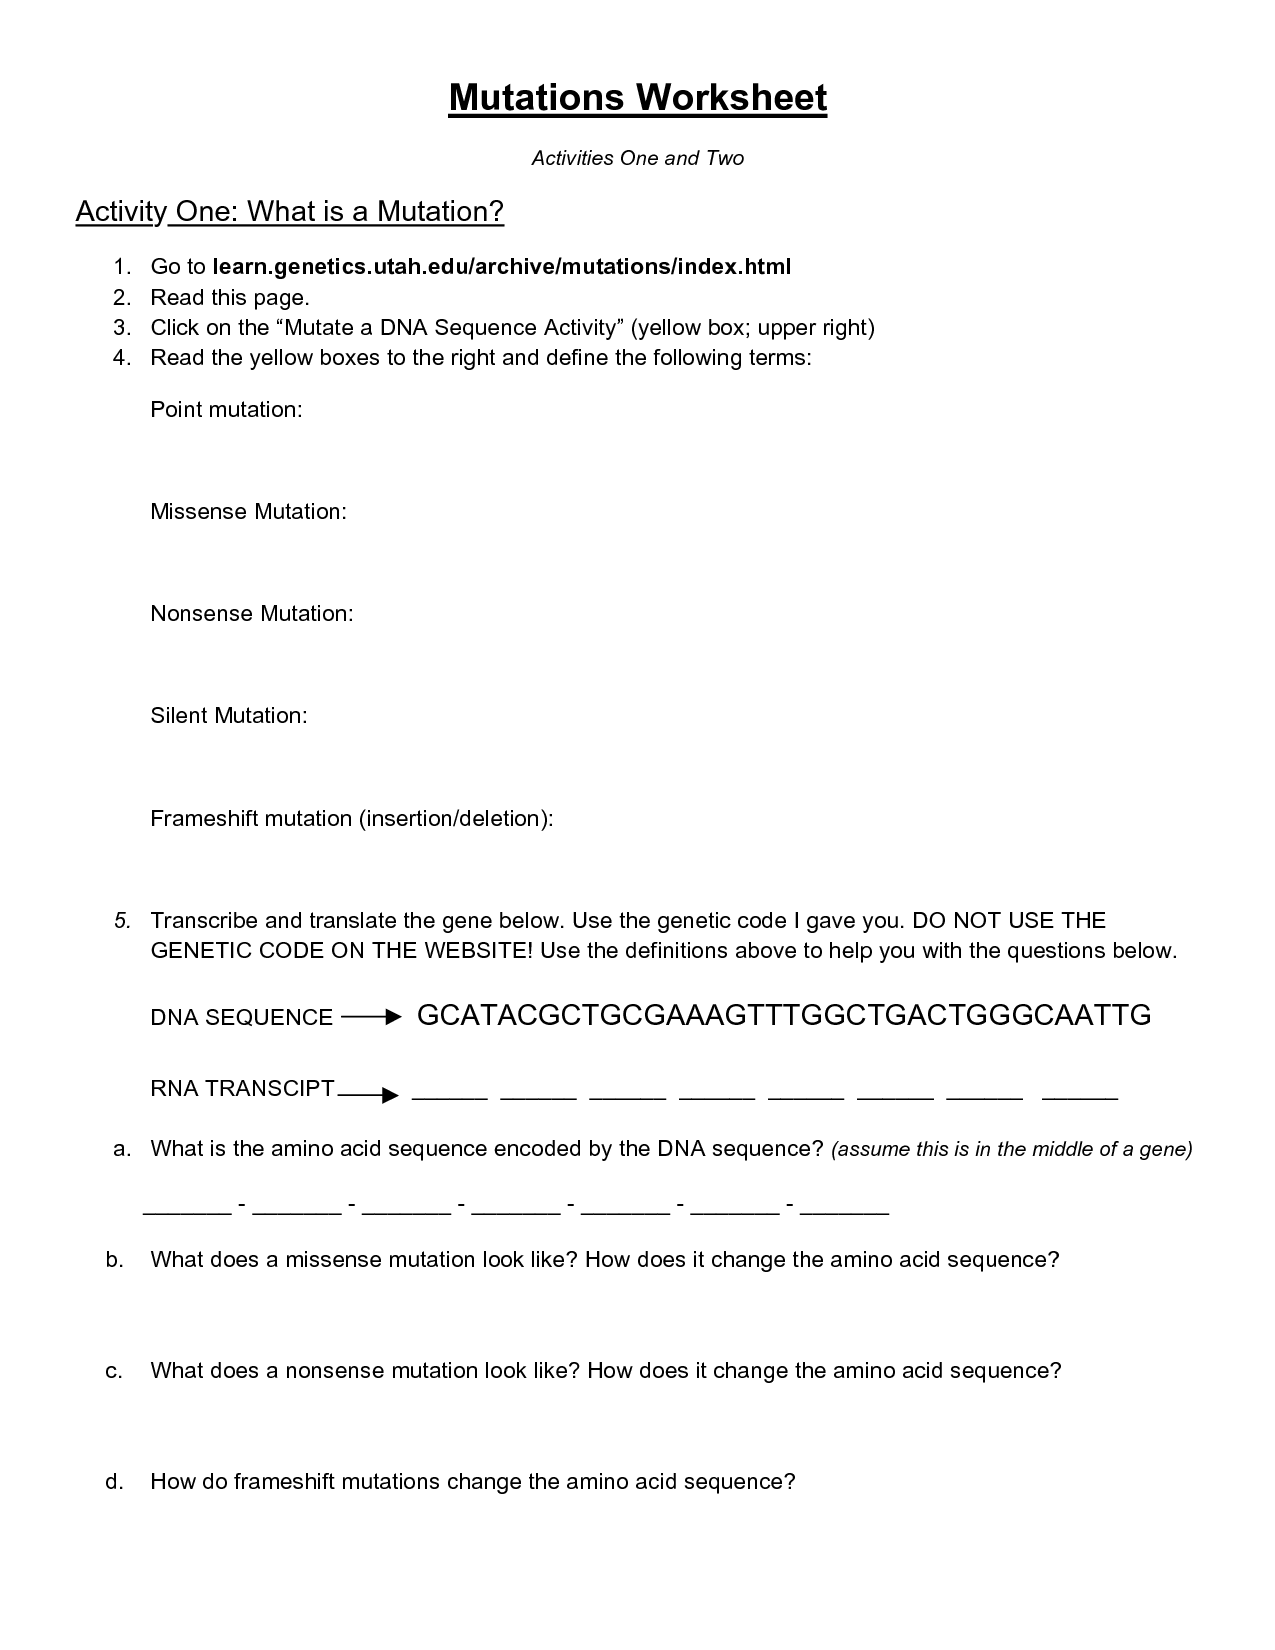 10 Best Images of Cobb DNA Mutations Practice Worksheet Answers Learning  Mutations Worksheet 